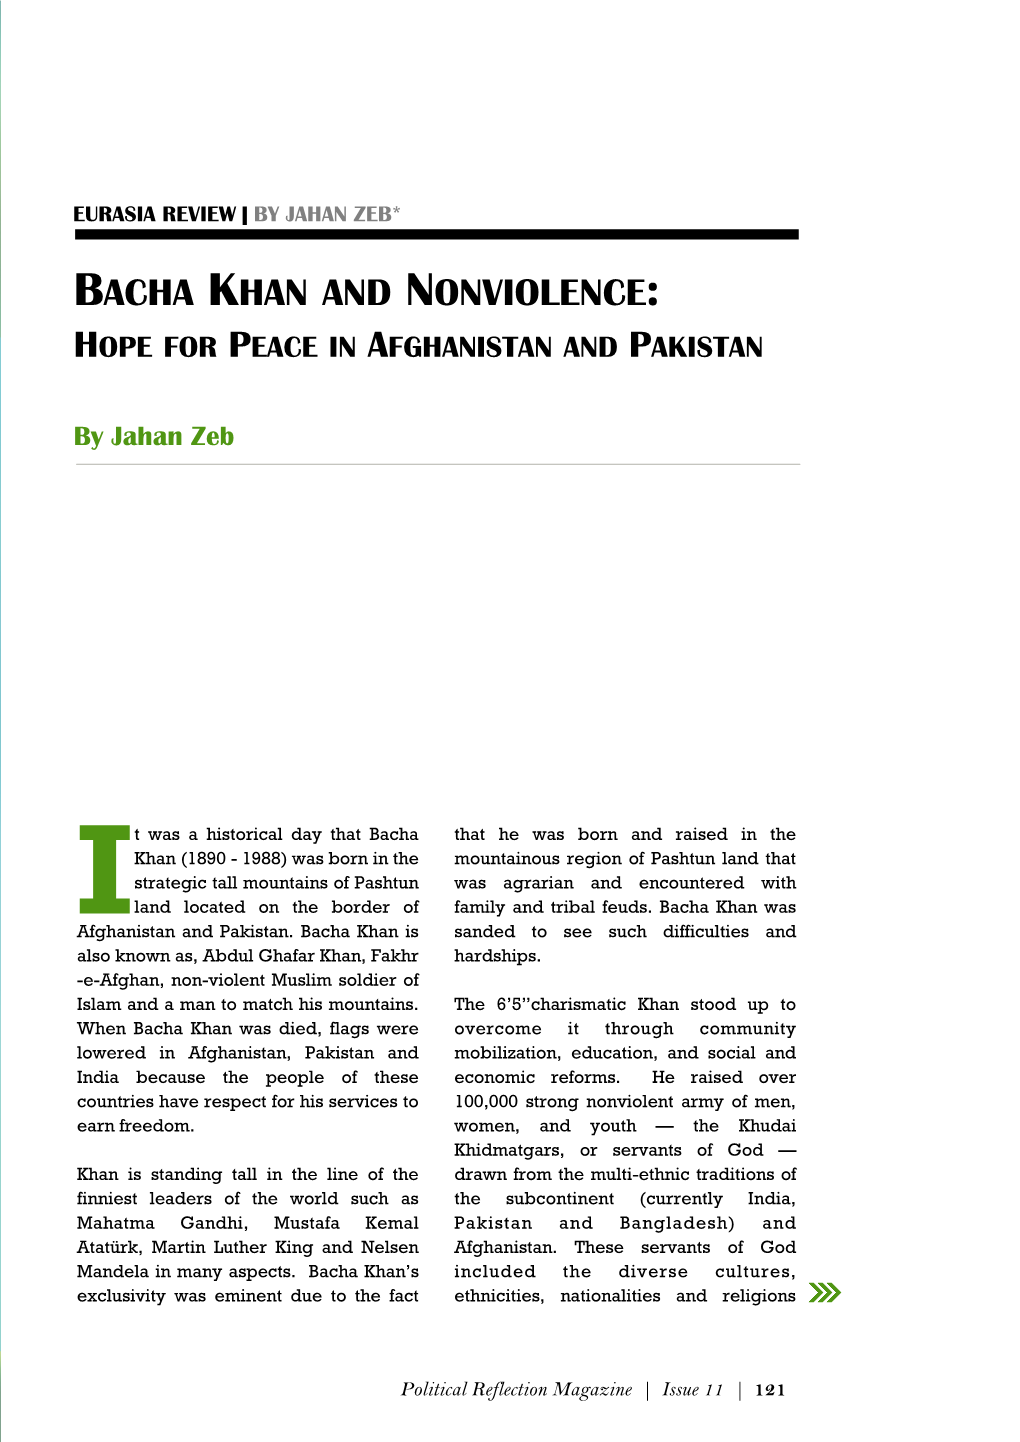 Bacha Khan and Nonviolence: Hope for Peace in Afghanistan and Pakistan